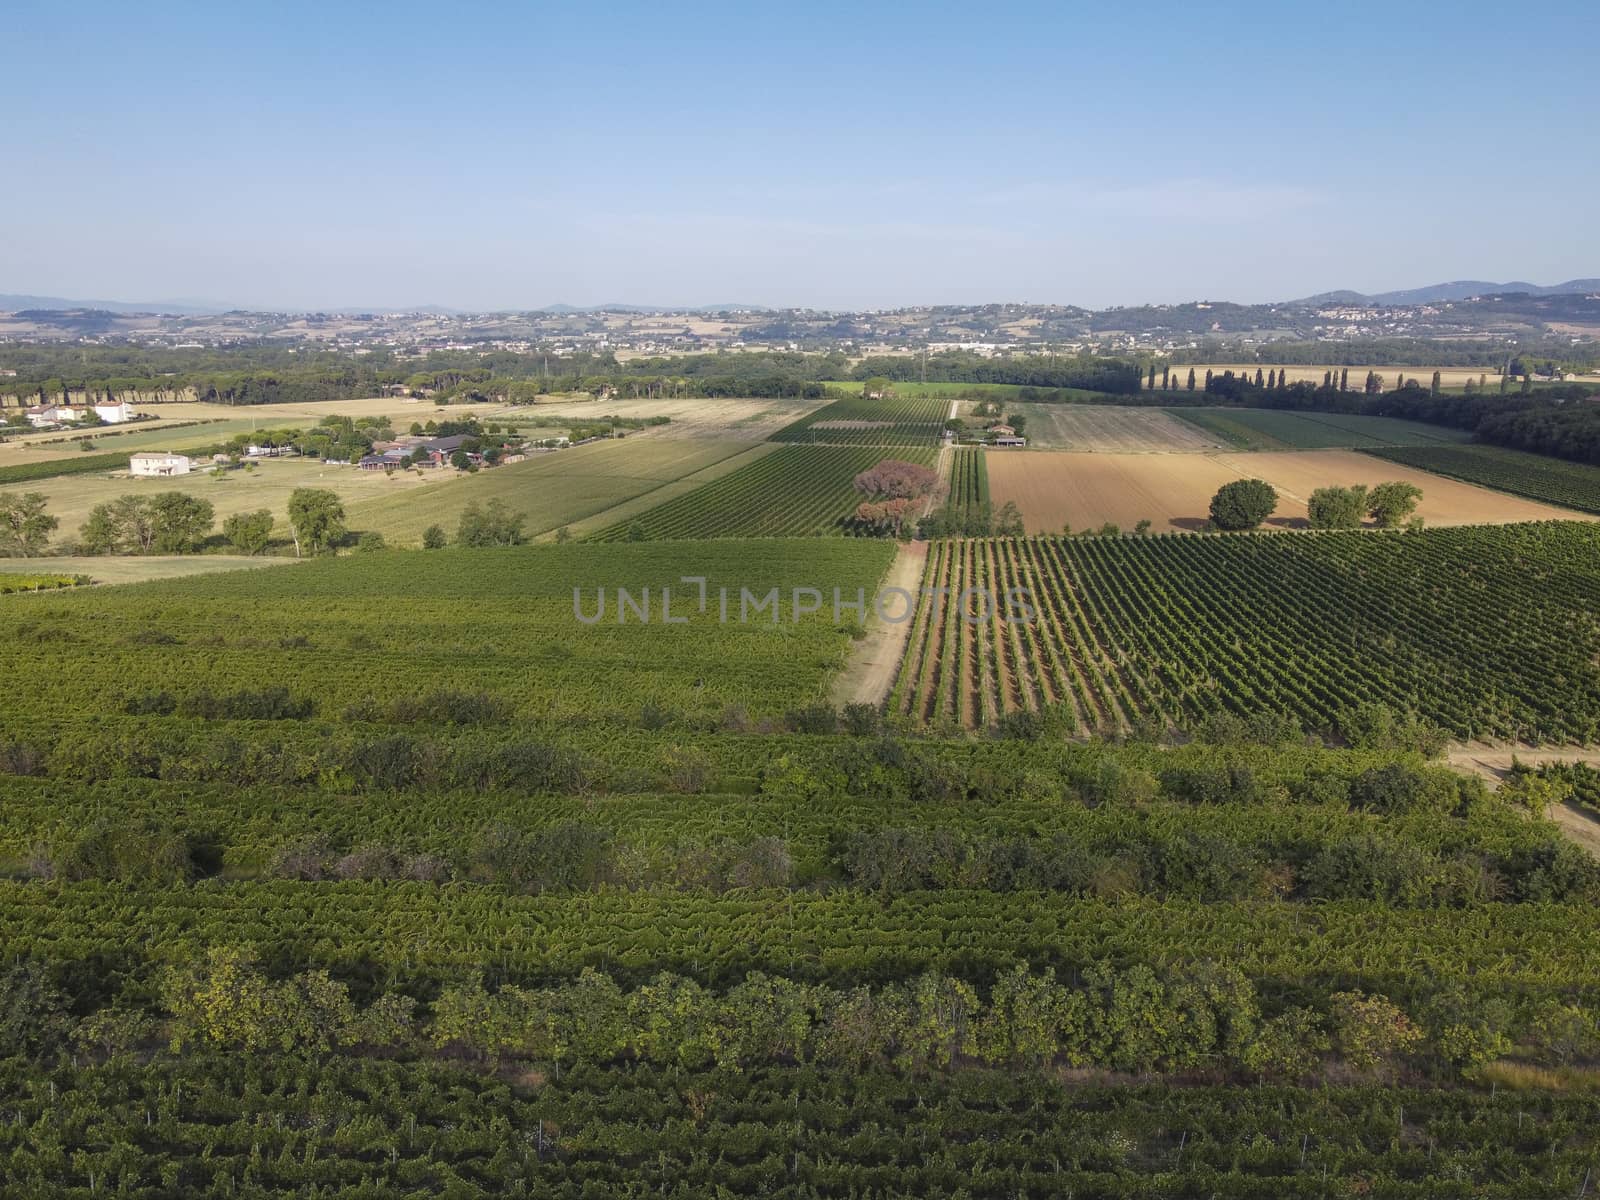 Panoramic view of scenic Tuscany landscape with vineyard in the Chianti region, Tuscany, Italy.